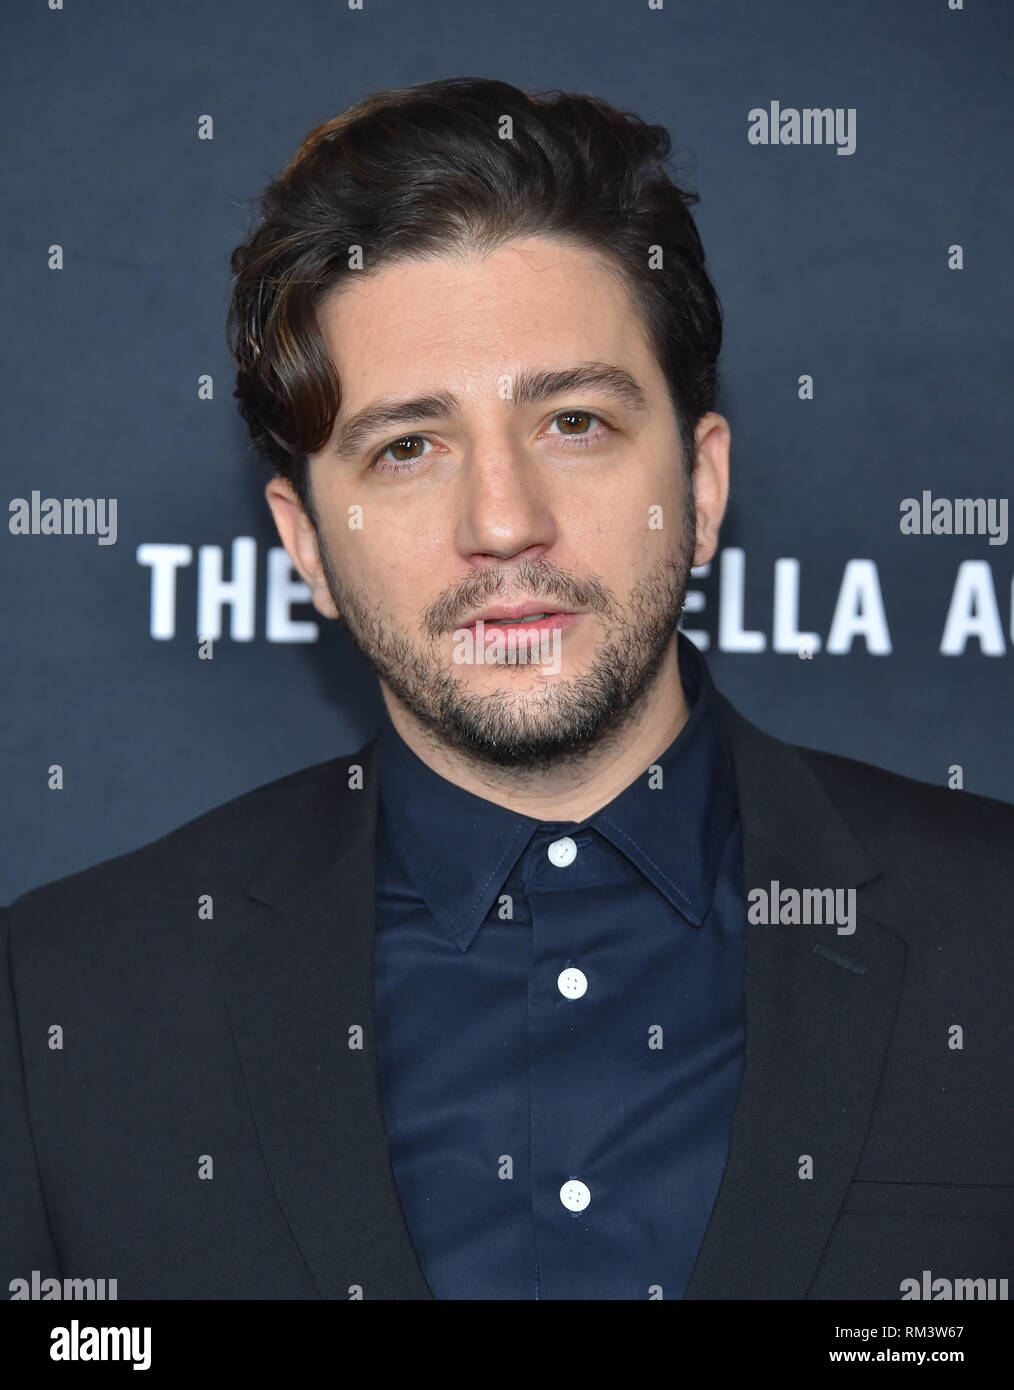 Hollywood, California, USA. 12th Feb, 2019. John Magaro arrives for Netflix's 'The Umbrella Academy' Premiere at the Arclight theater. Credit: Lisa O'Connor/ZUMA Wire/Alamy Live News Stock Photo